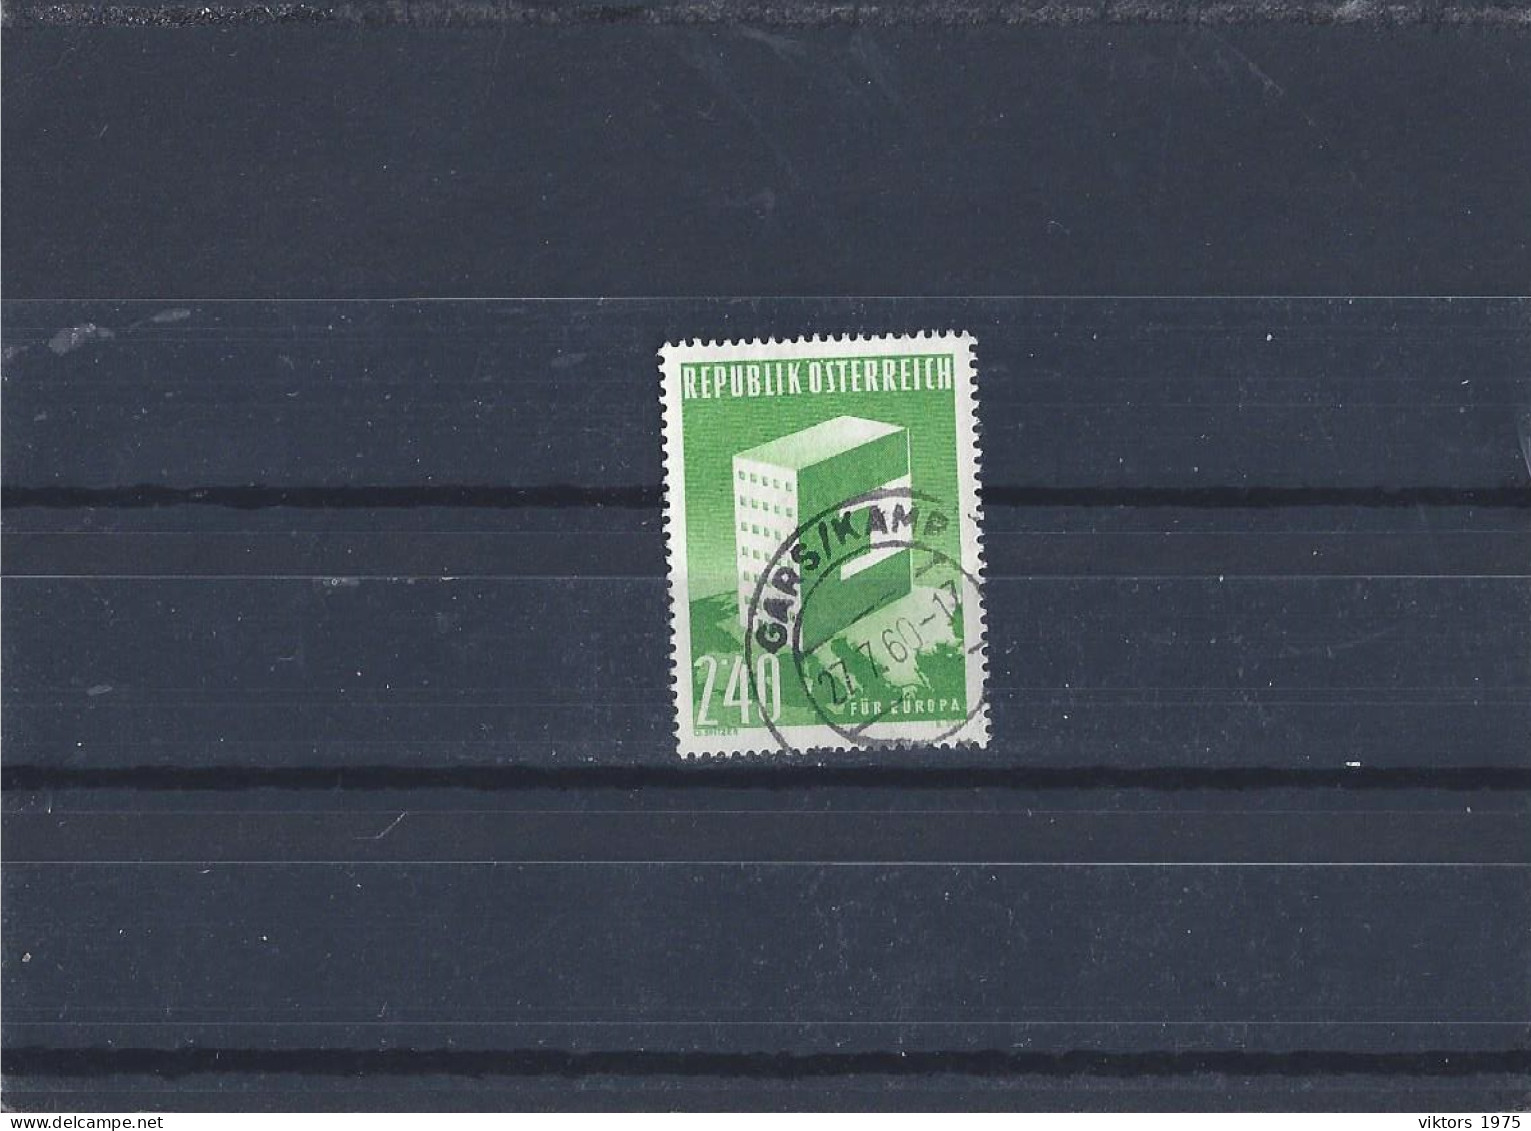 Used Stamp Nr.1059 In MICHEL Catalog - Used Stamps